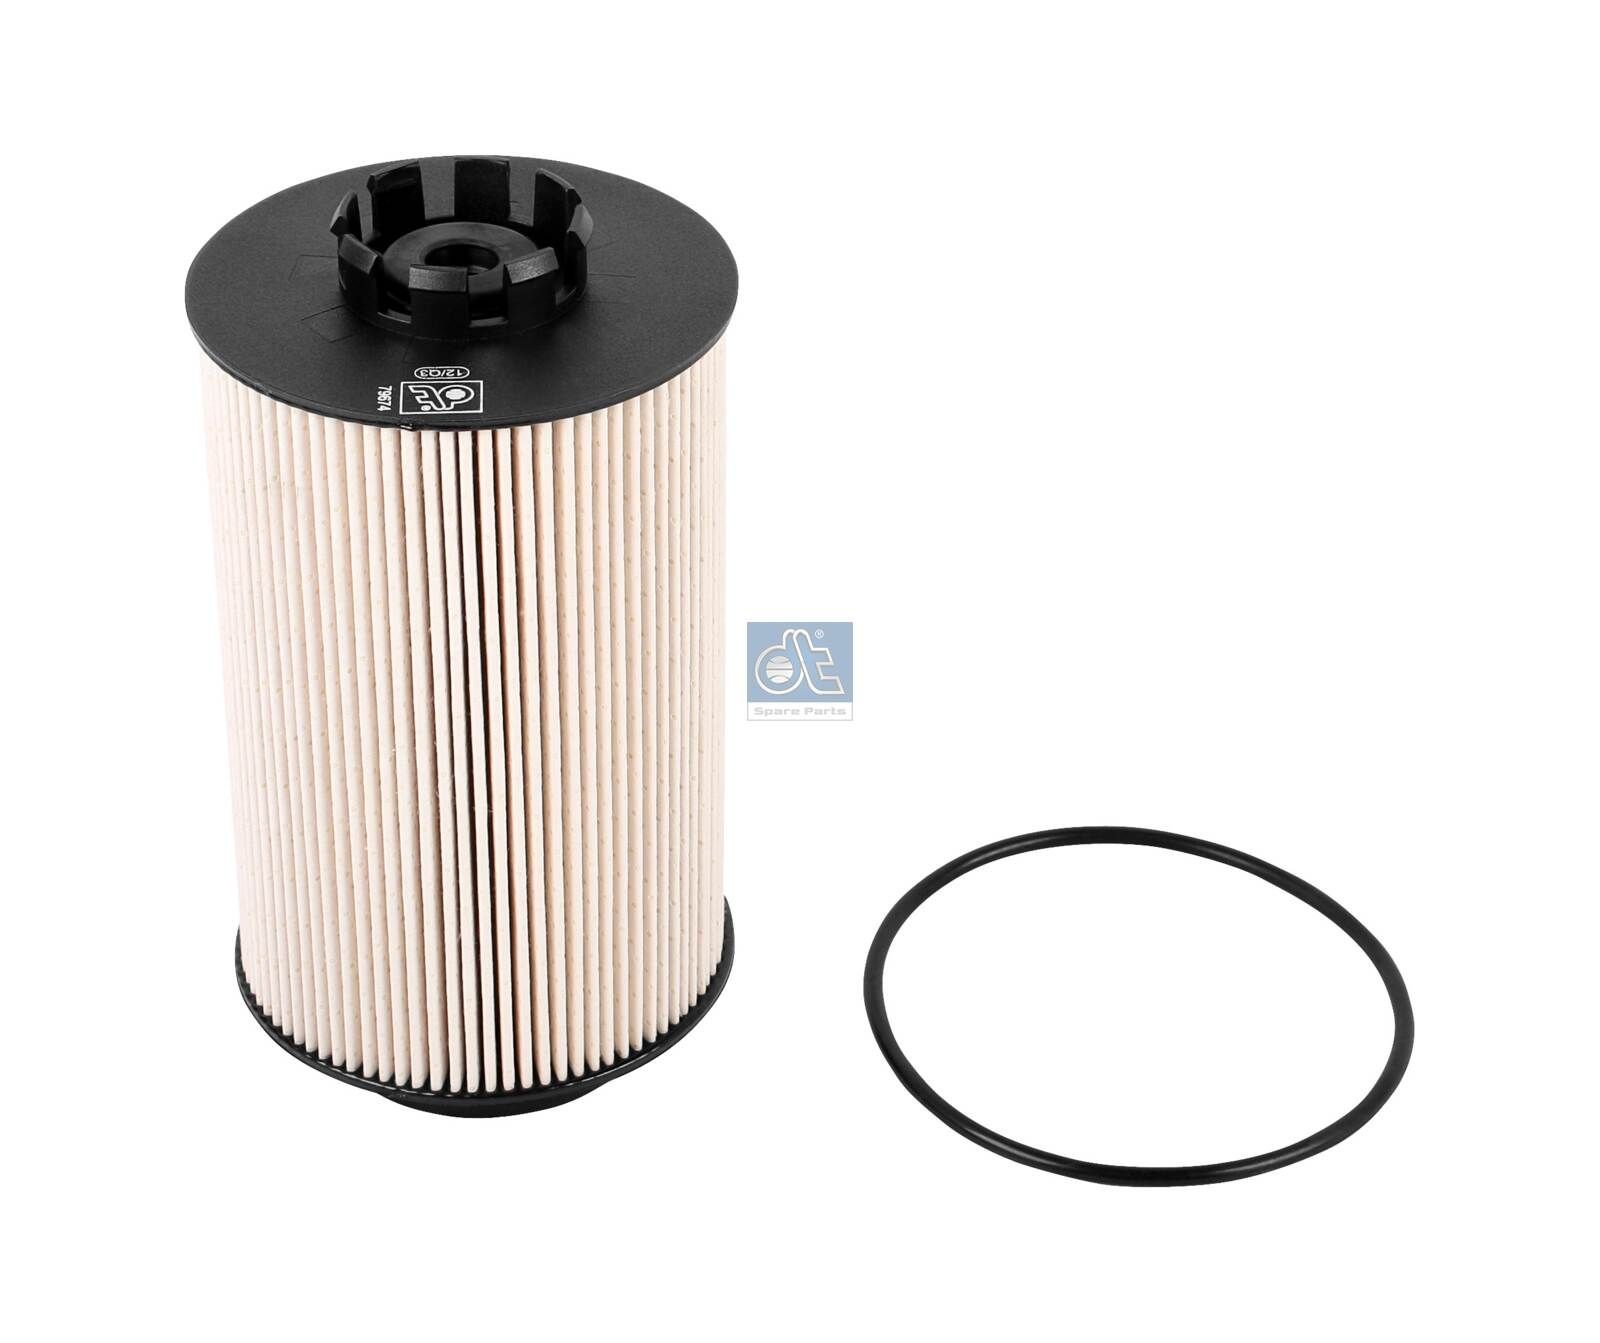 PU 1059 x DT Spare Parts 3.22009 Fuel filter 51 12503 0088